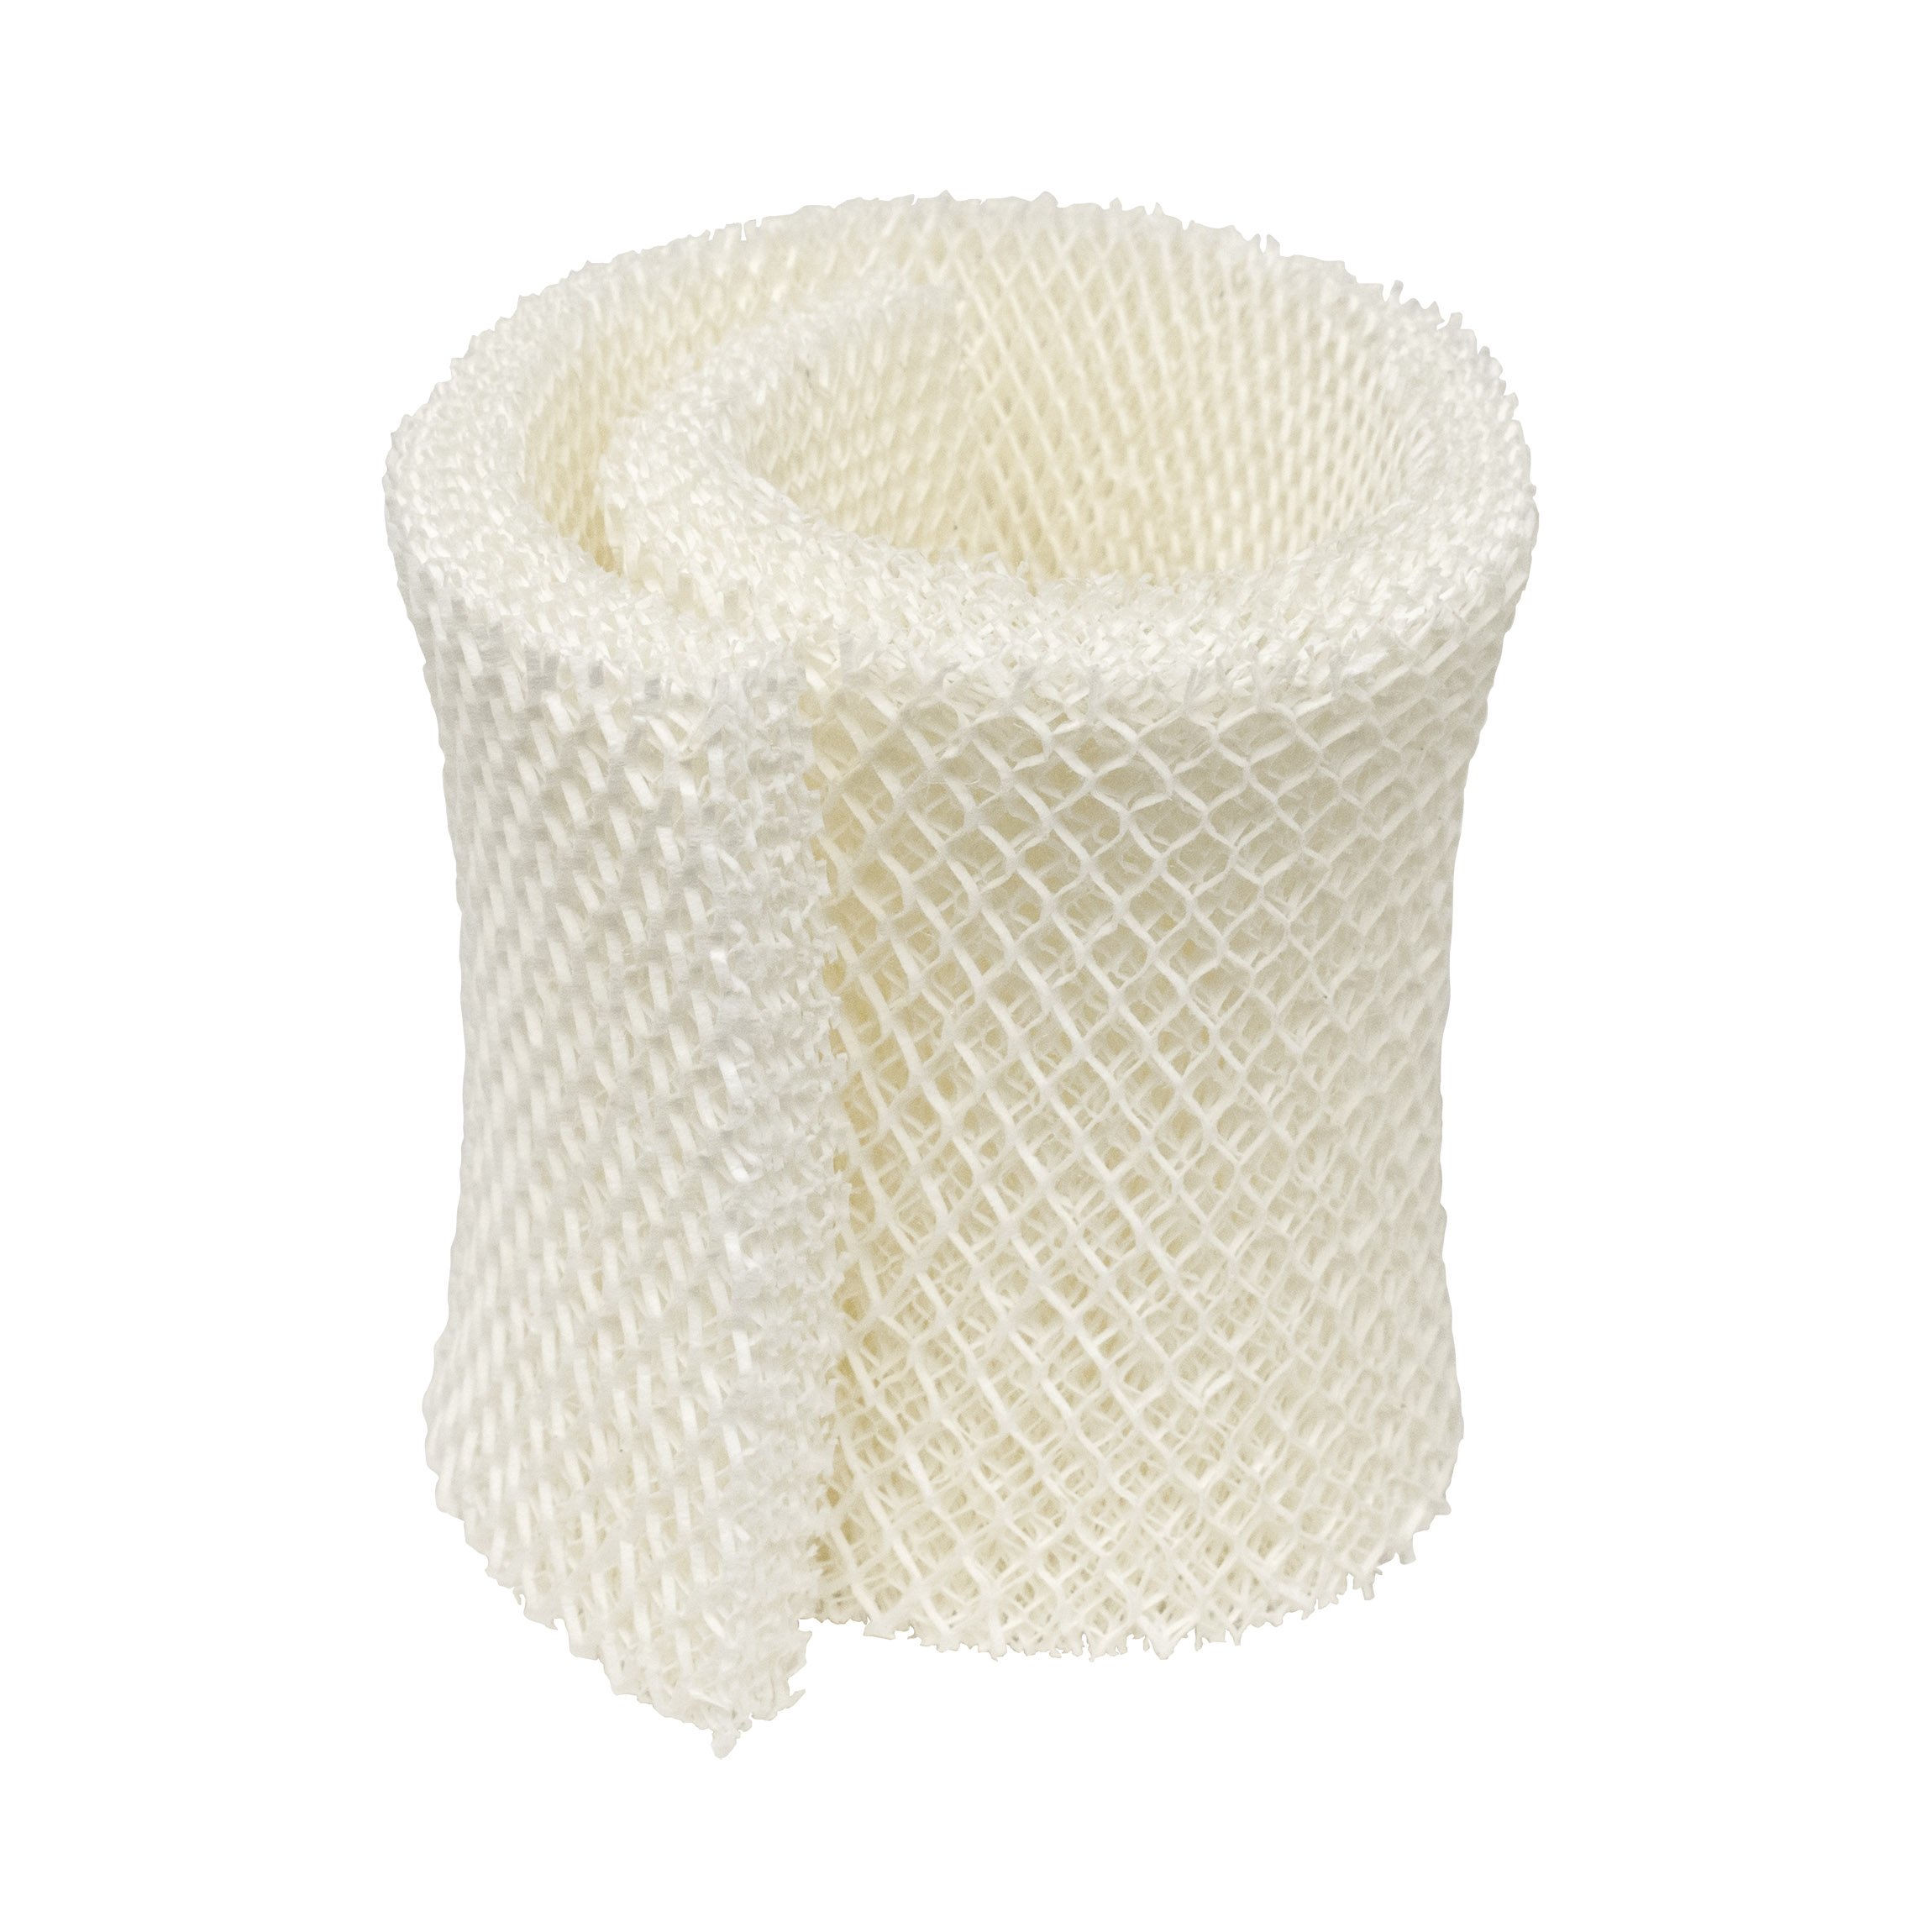 AIRCARE MAF2 Replacement Wicking Humidifier Filter (1)